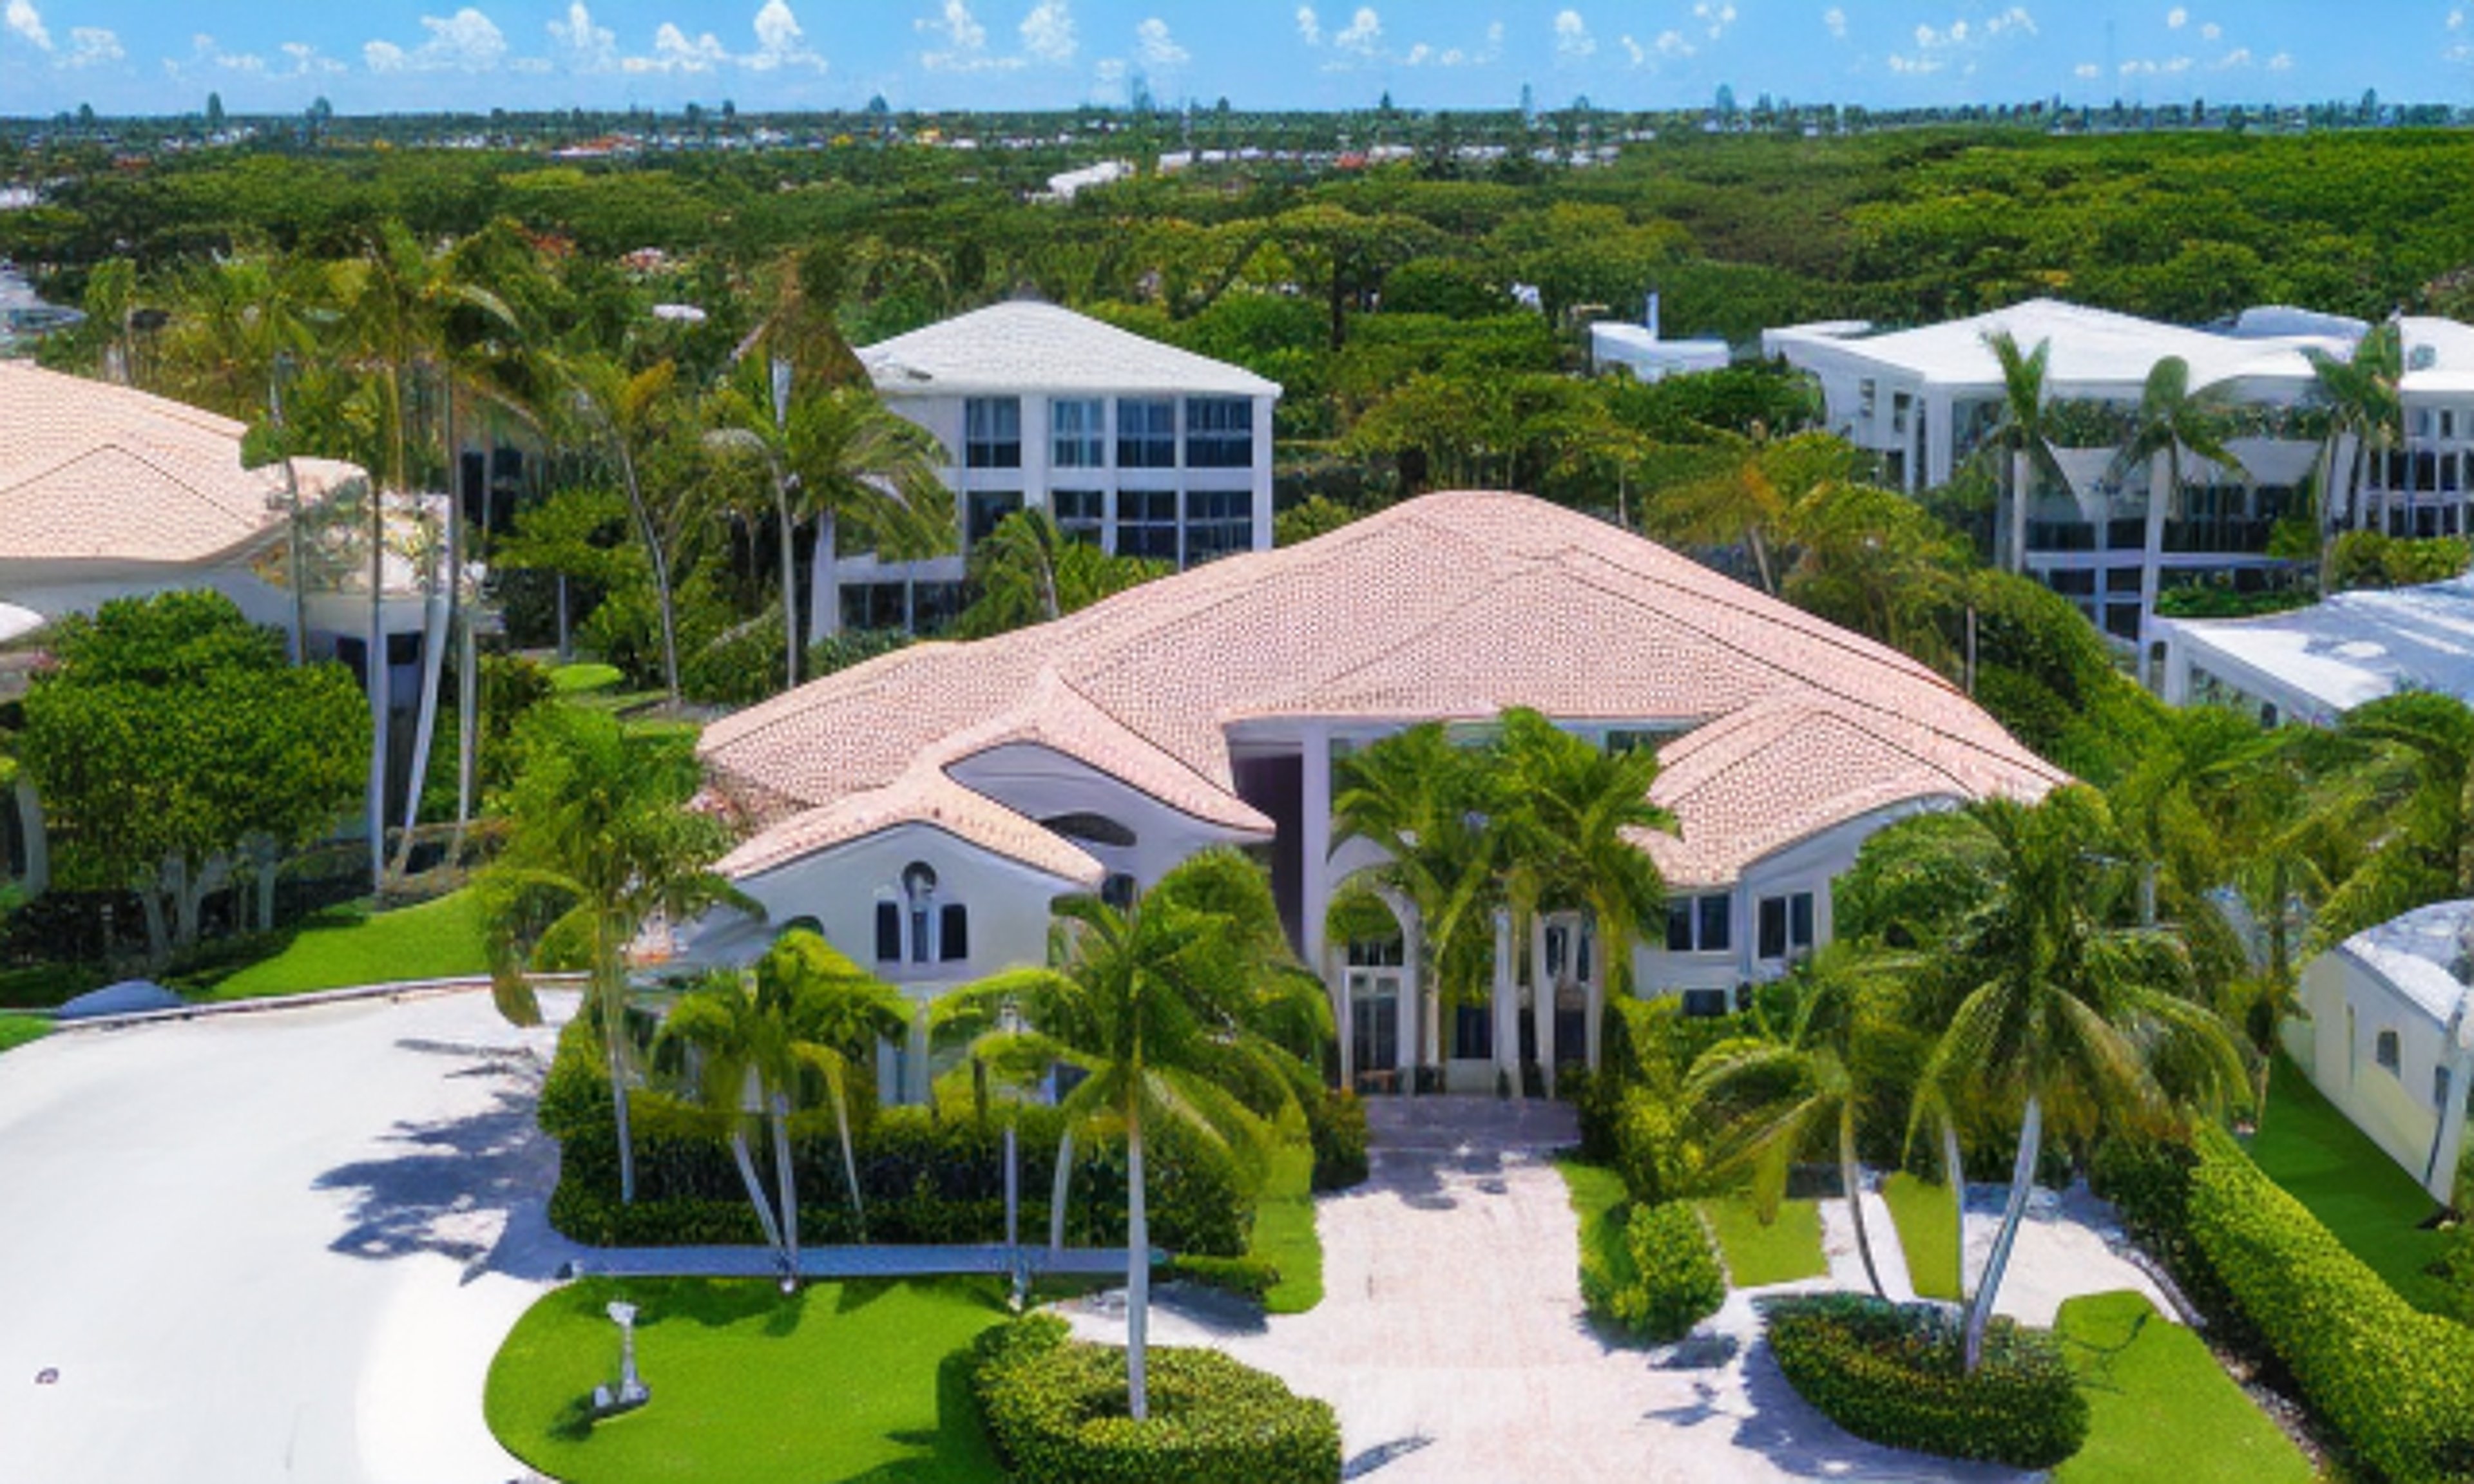 Miami Real Estate Market Continues to Thrive with Multi-Million Dollar Deals